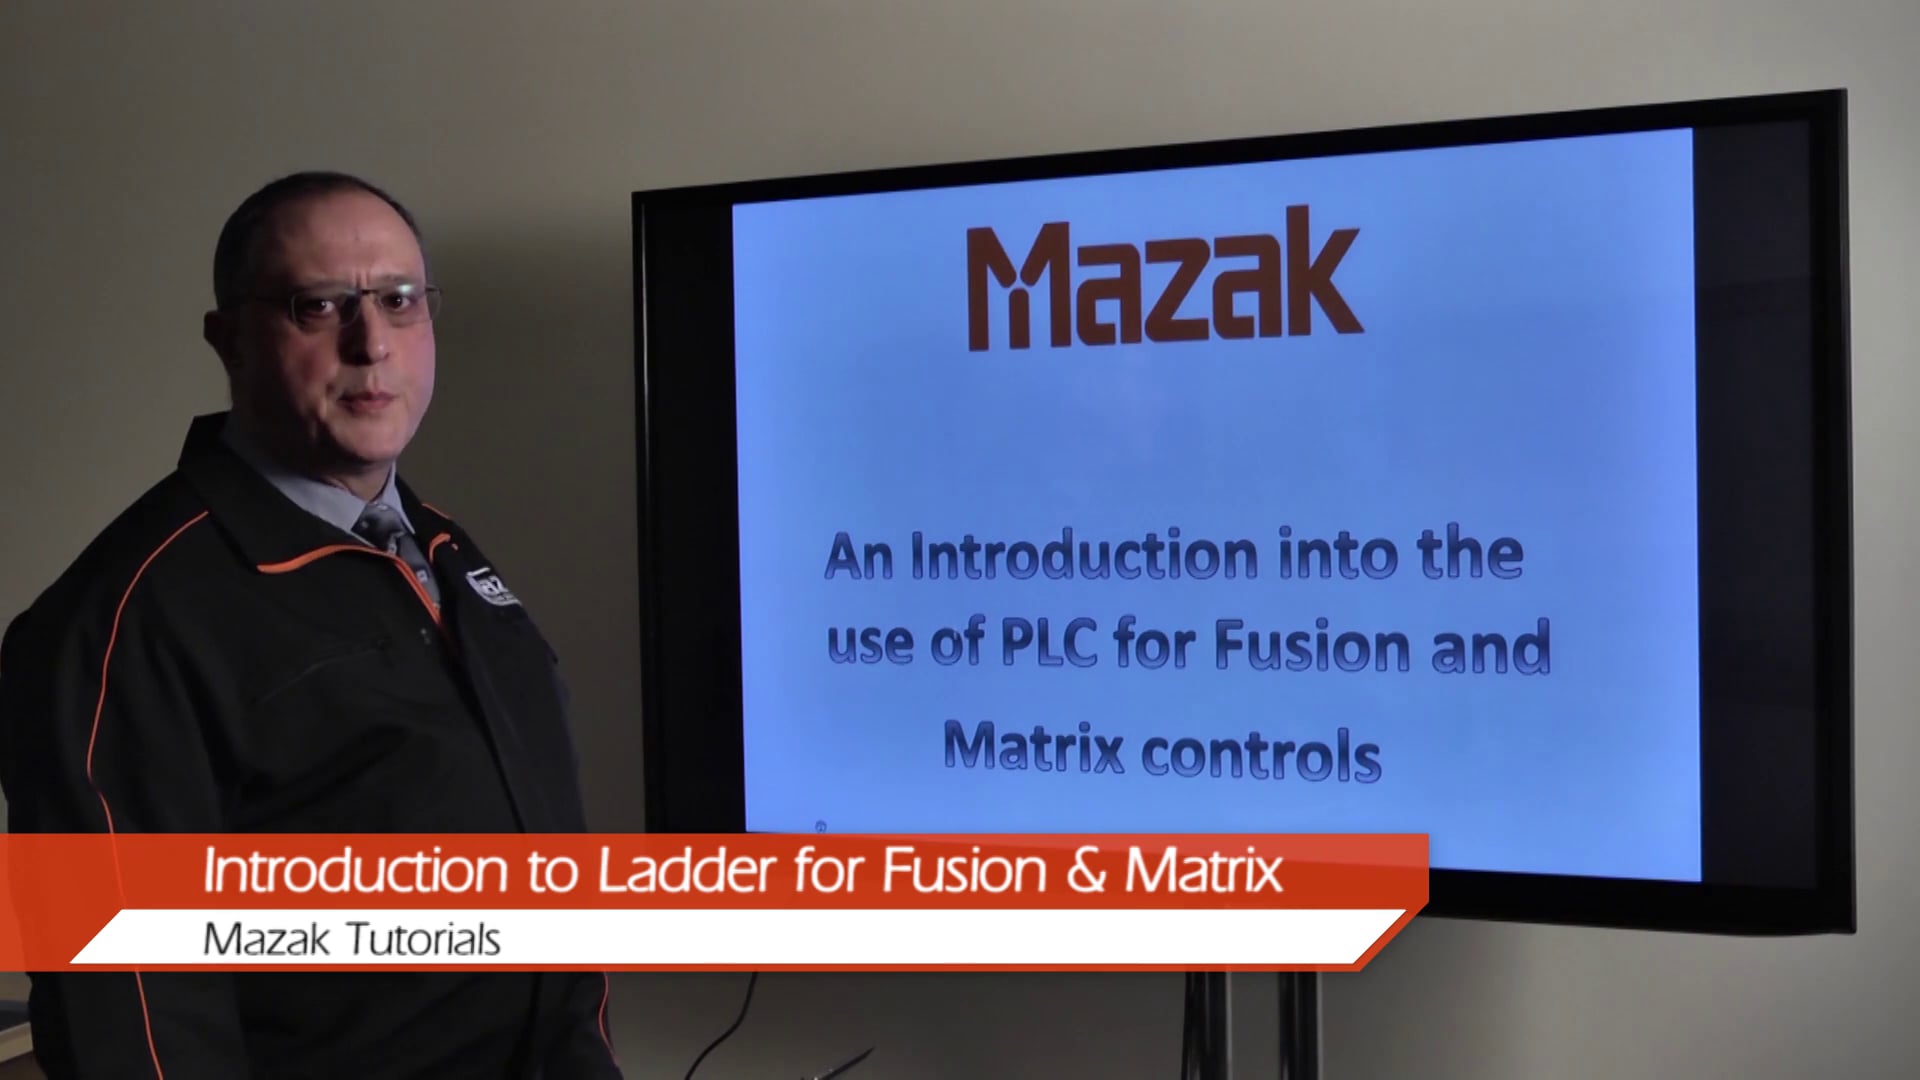 Introduction to Ladder for Fusion & Matrix